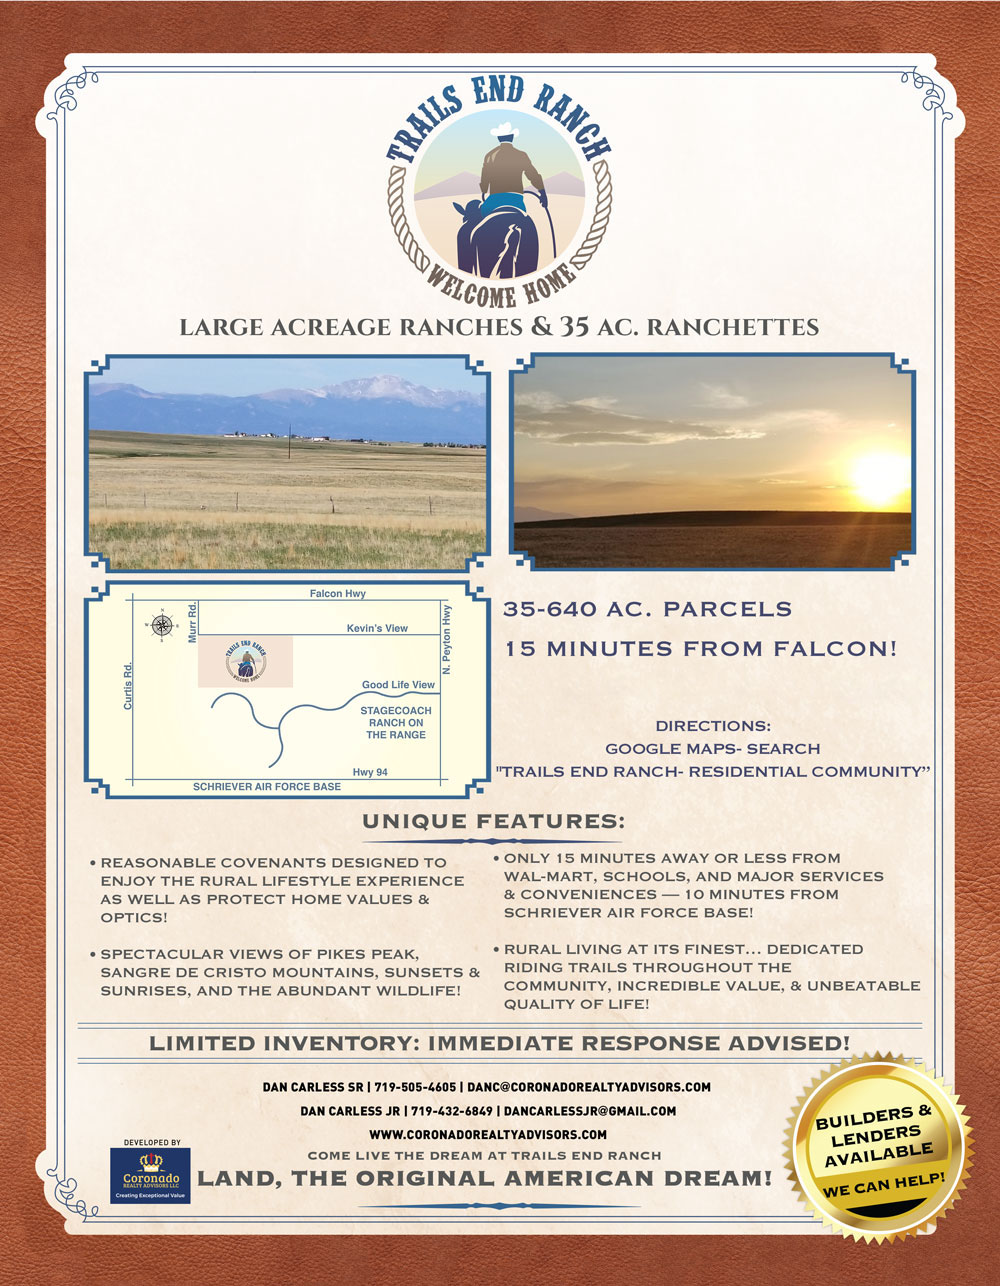 TE-Trails-End-Ranch-PNG-Format-Marketing-FlyerFW-